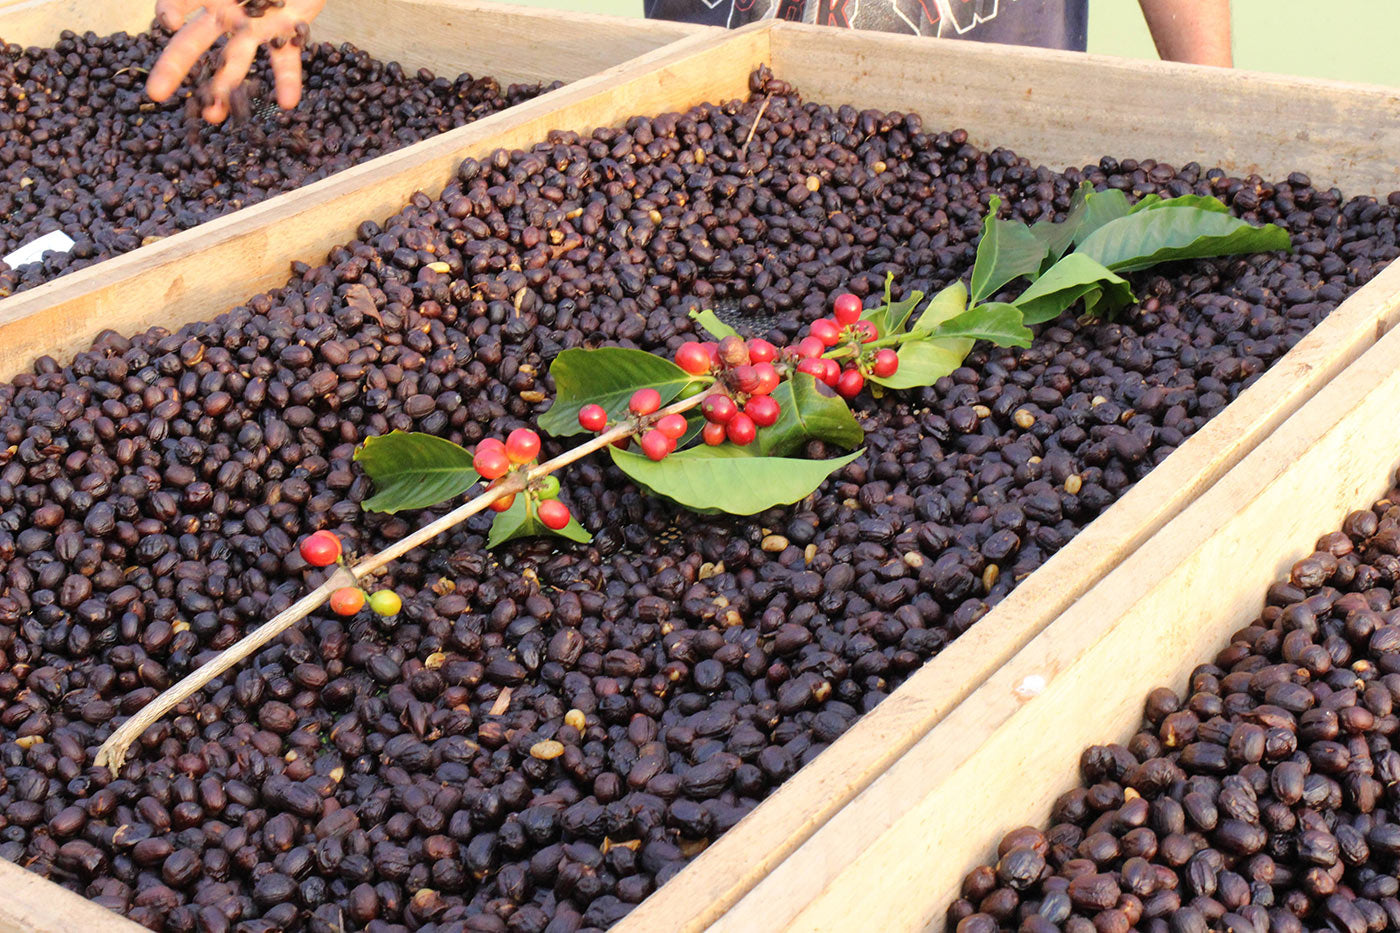 <div id="attachment_578" class="wp-caption aligncenter"> <p class="wp-caption-text">Natural processed coffee on raised African style beds at Granja La Esperanza</p> </div> <p> </p>